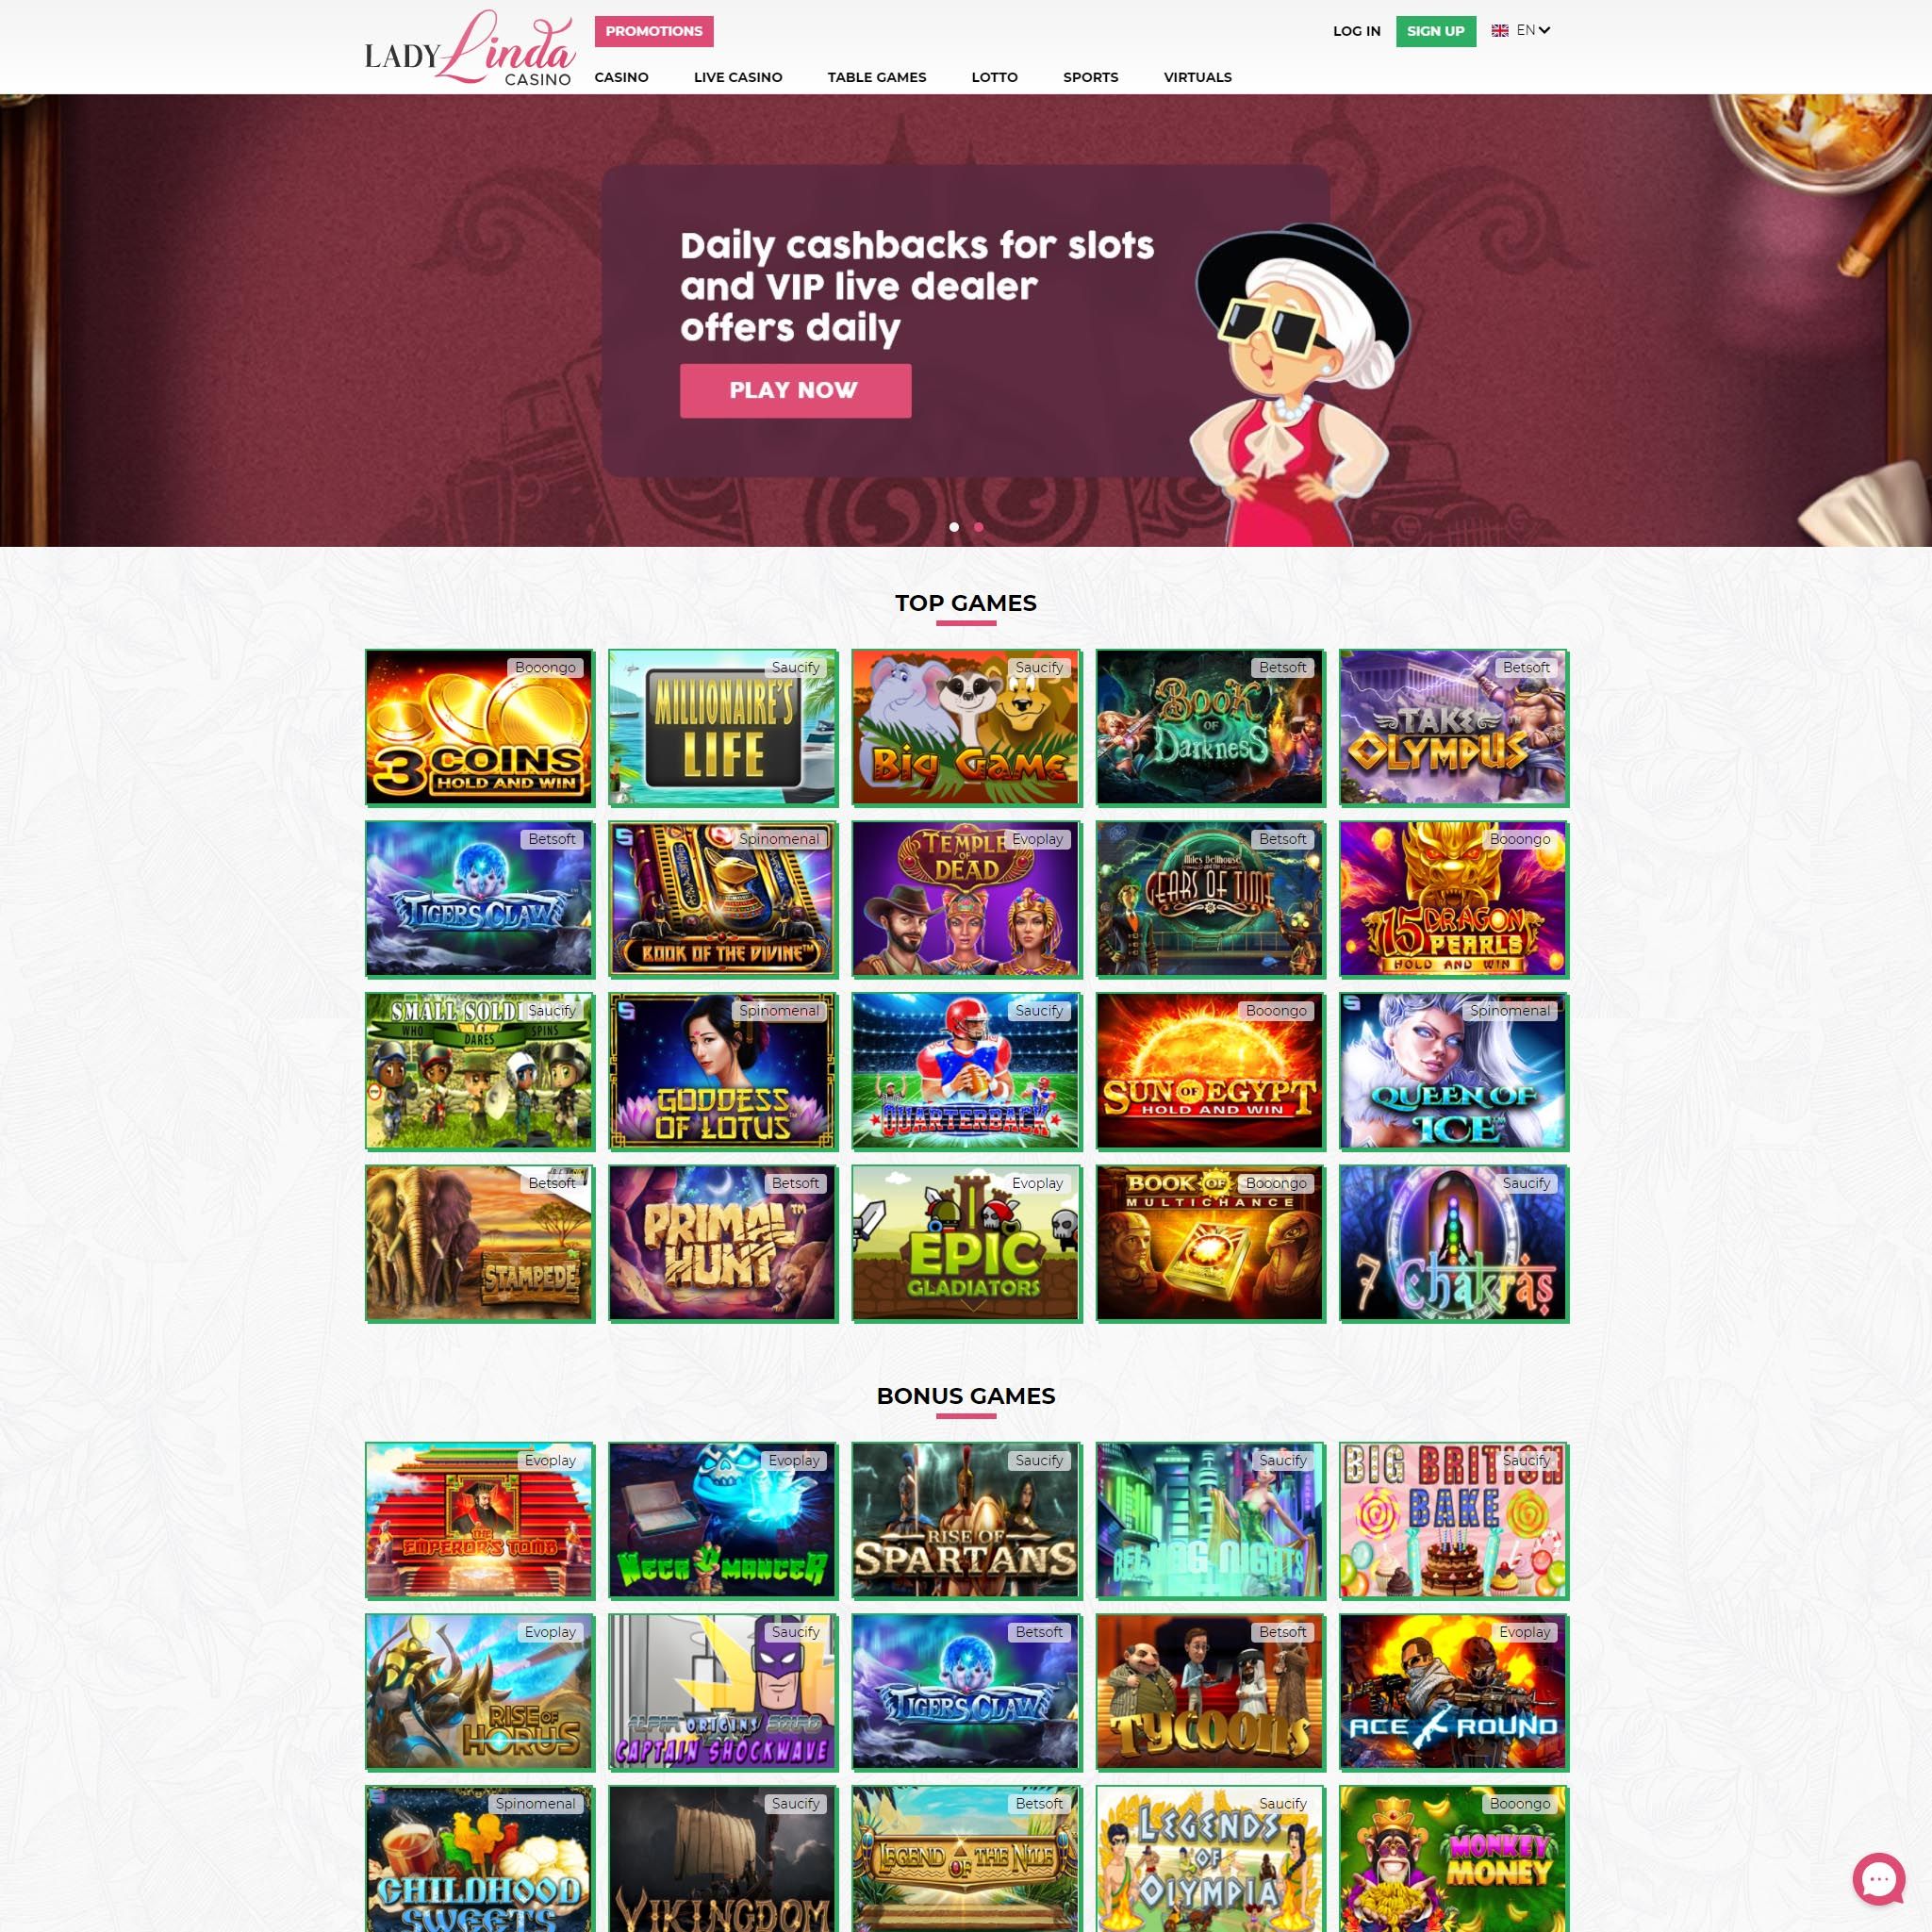 LadyLinda Casino review by Mr. Gamble